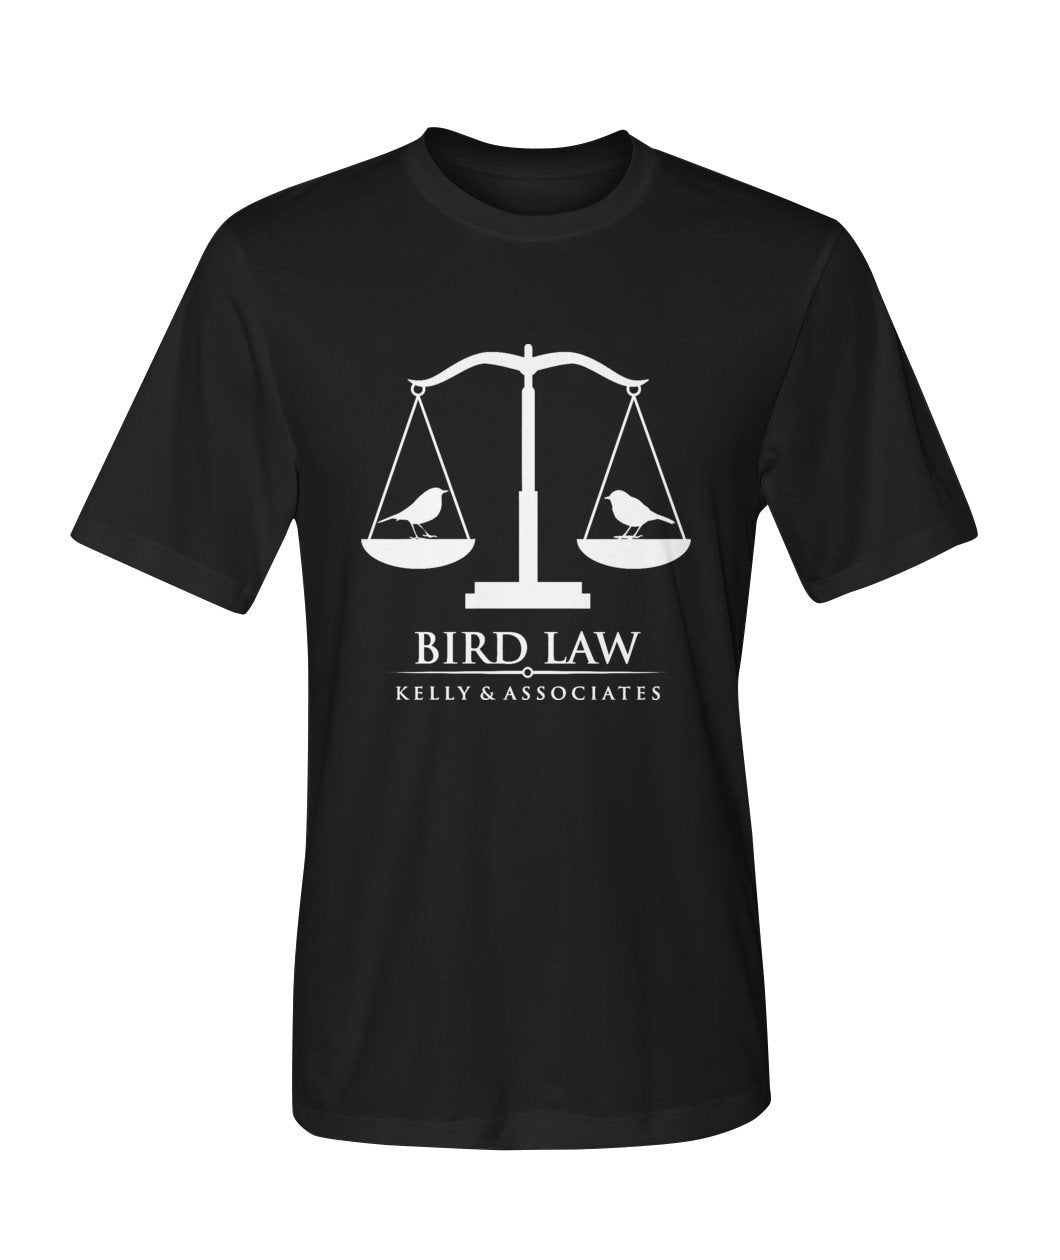 Check Out This Awesome Bird Law Dry Sport Tee T Shirt